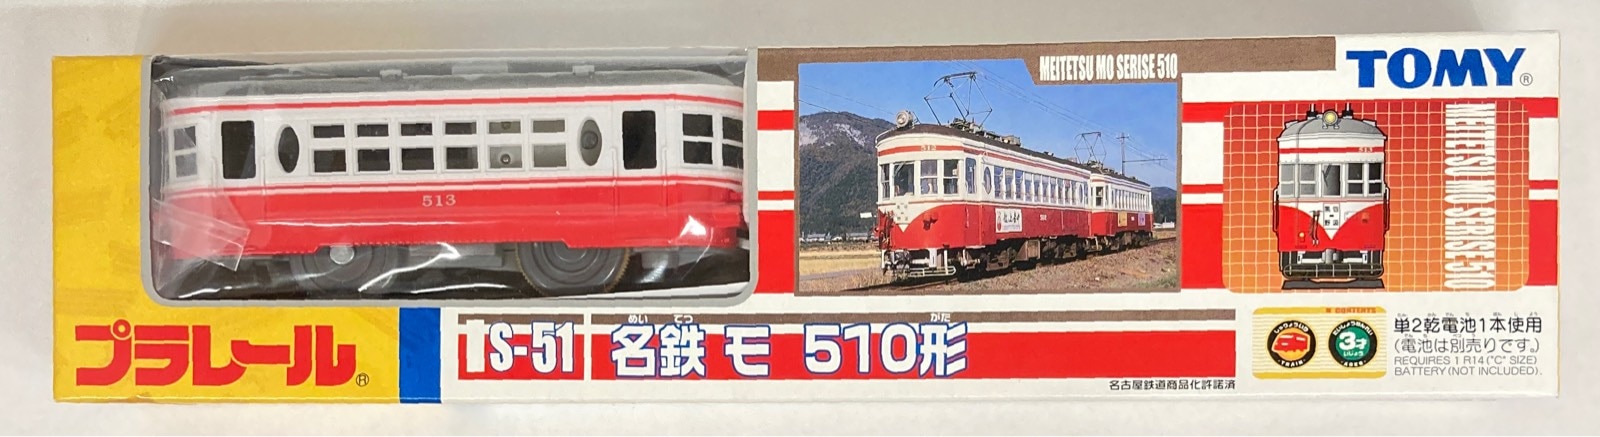 Plarail Meitetsu model 510 red and white S-51 F/S 